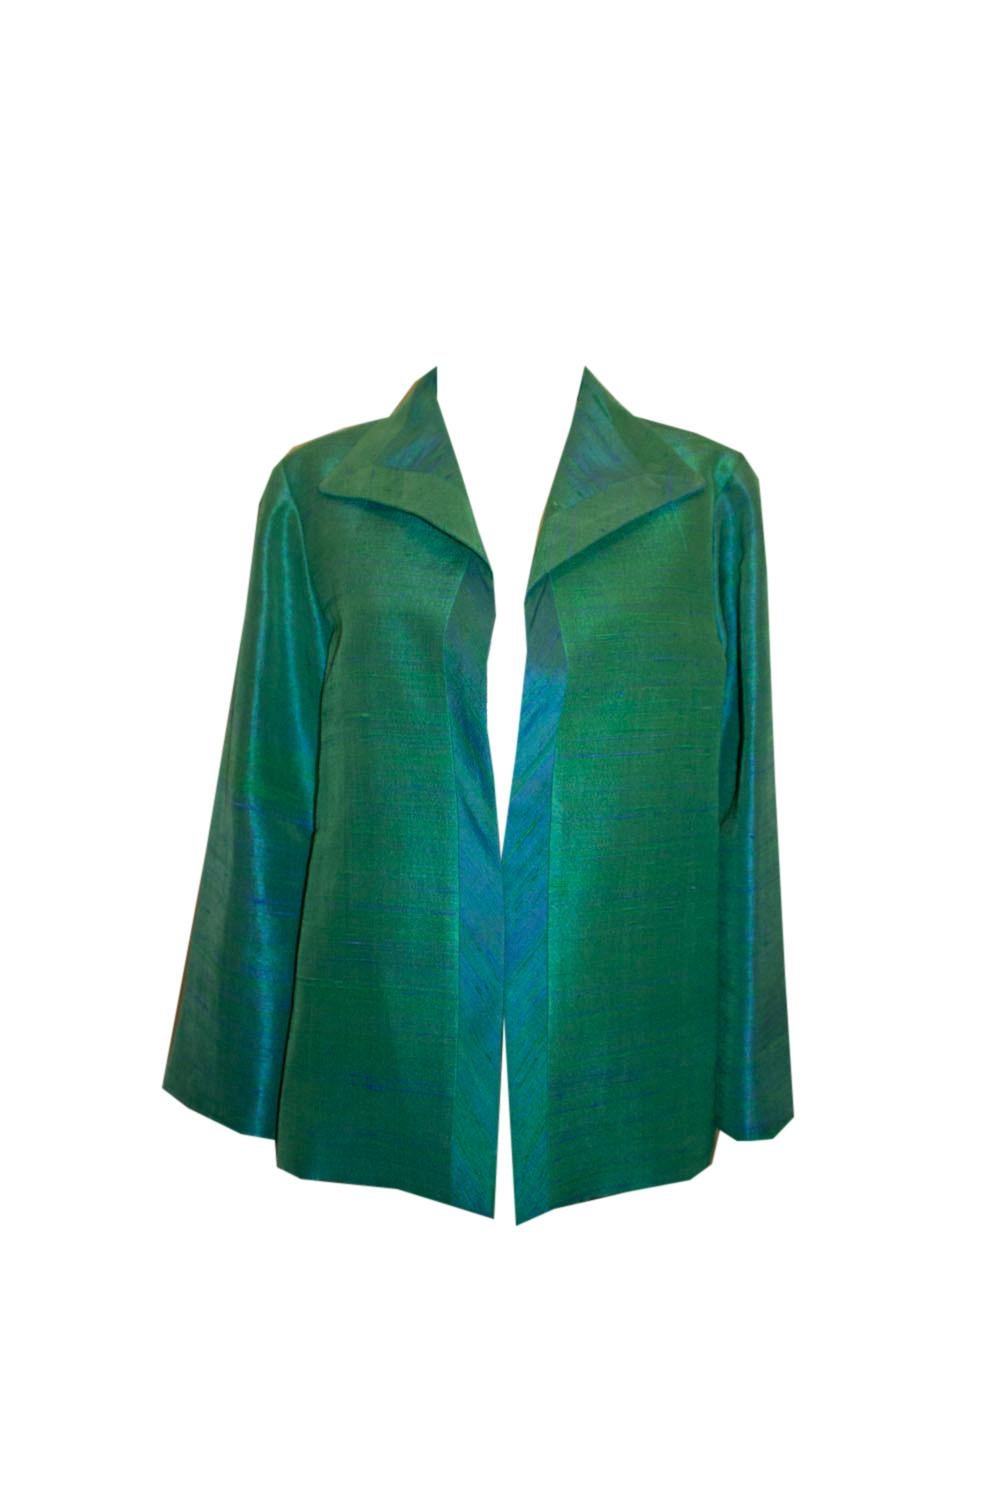 Vintage The Thai Shop Green and Blue Silk Jacket 2